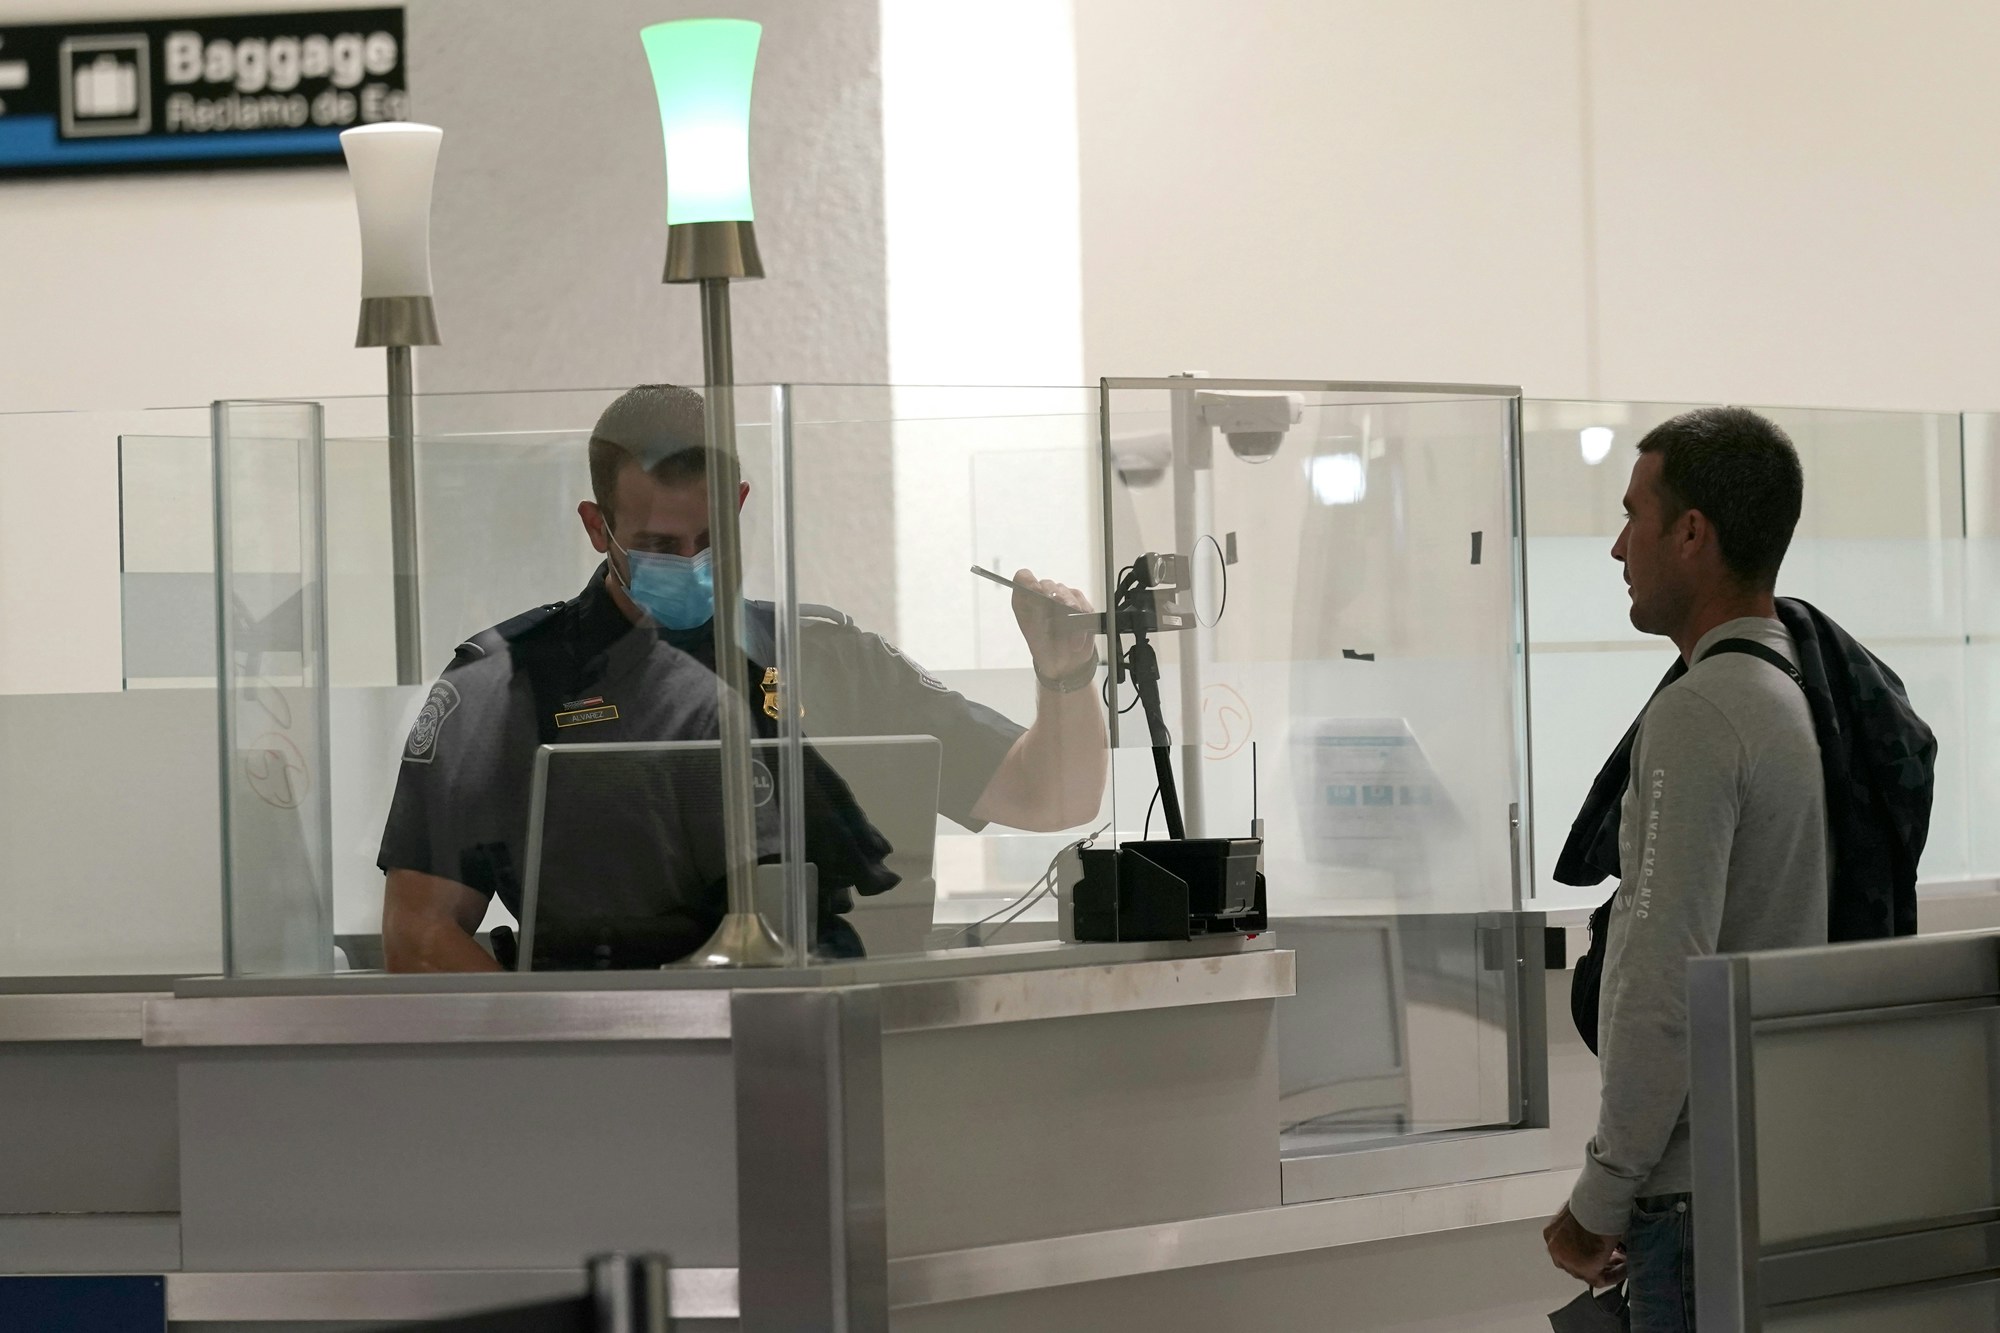 International passengers arrive at Miami international Airport where they are screened by U.S. Customs and Border Protection (CBP) using facial biometrics to automate manual document checks required for admission into the U.S. Friday, Nov. 20, 2020, in Miami. Miami International Airport is the latest airport to provide Simplified Arrival airport-wide. (AP Photo/Lynne Sladky)